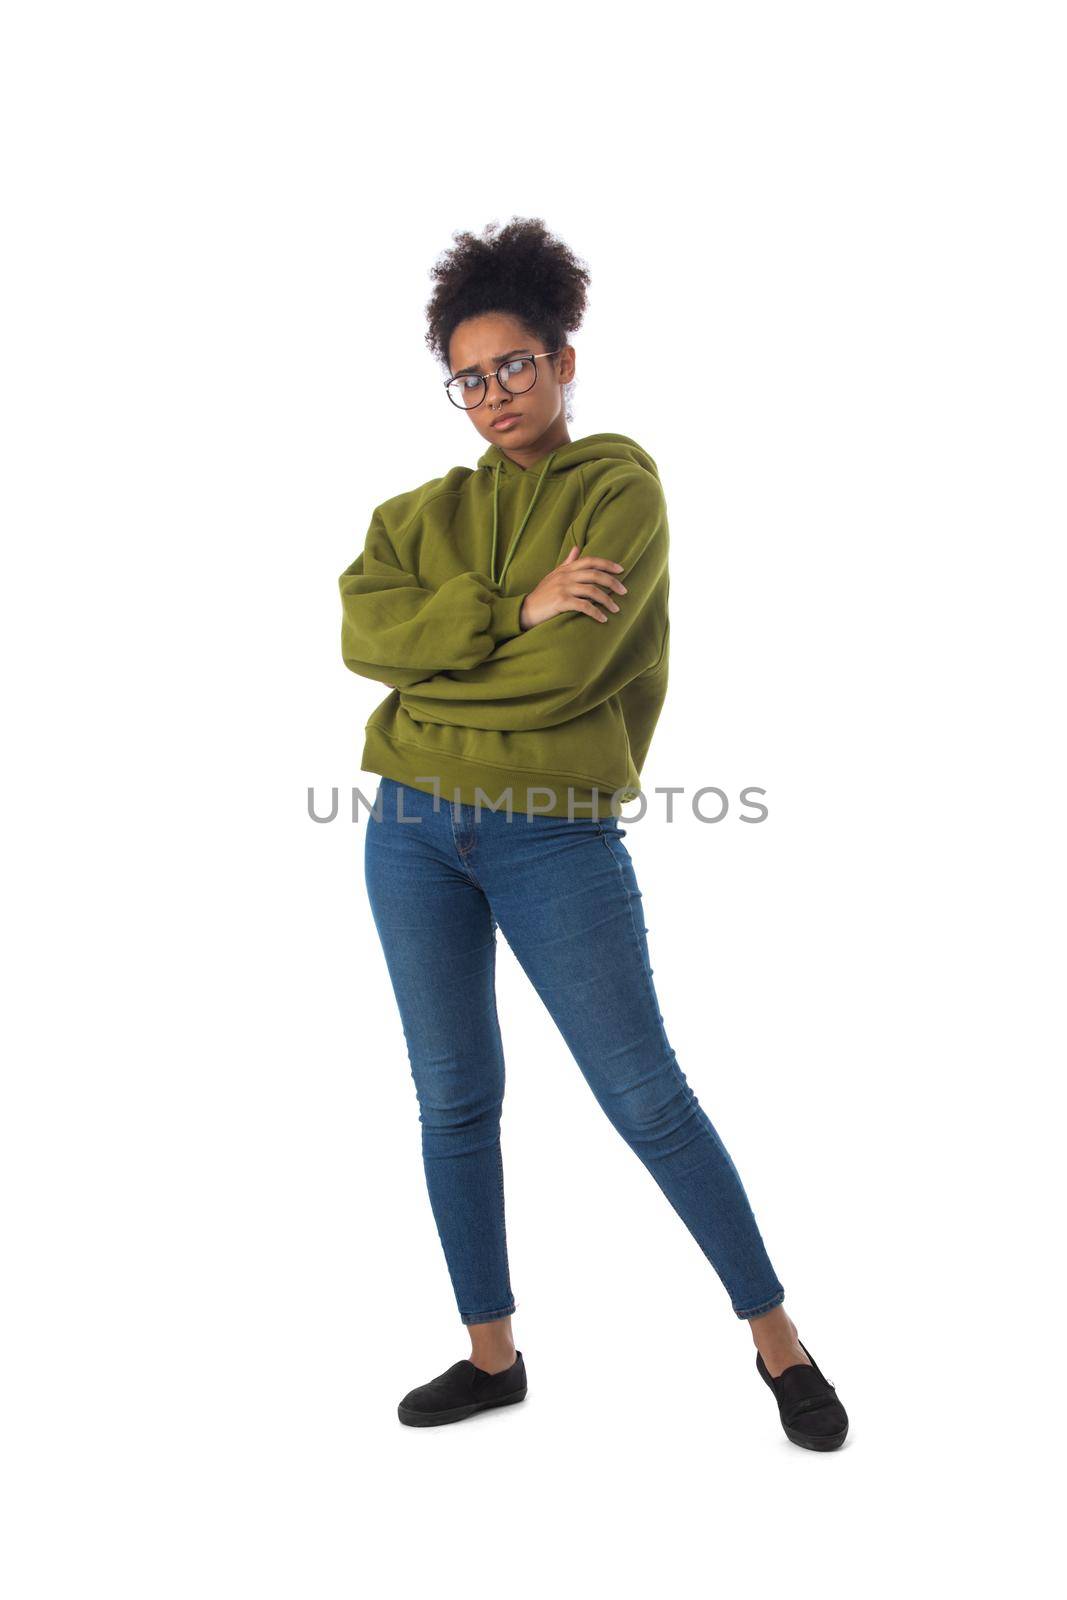 Black woman wearing casual clothes standing with arms folded full length portrait isolated over a white background